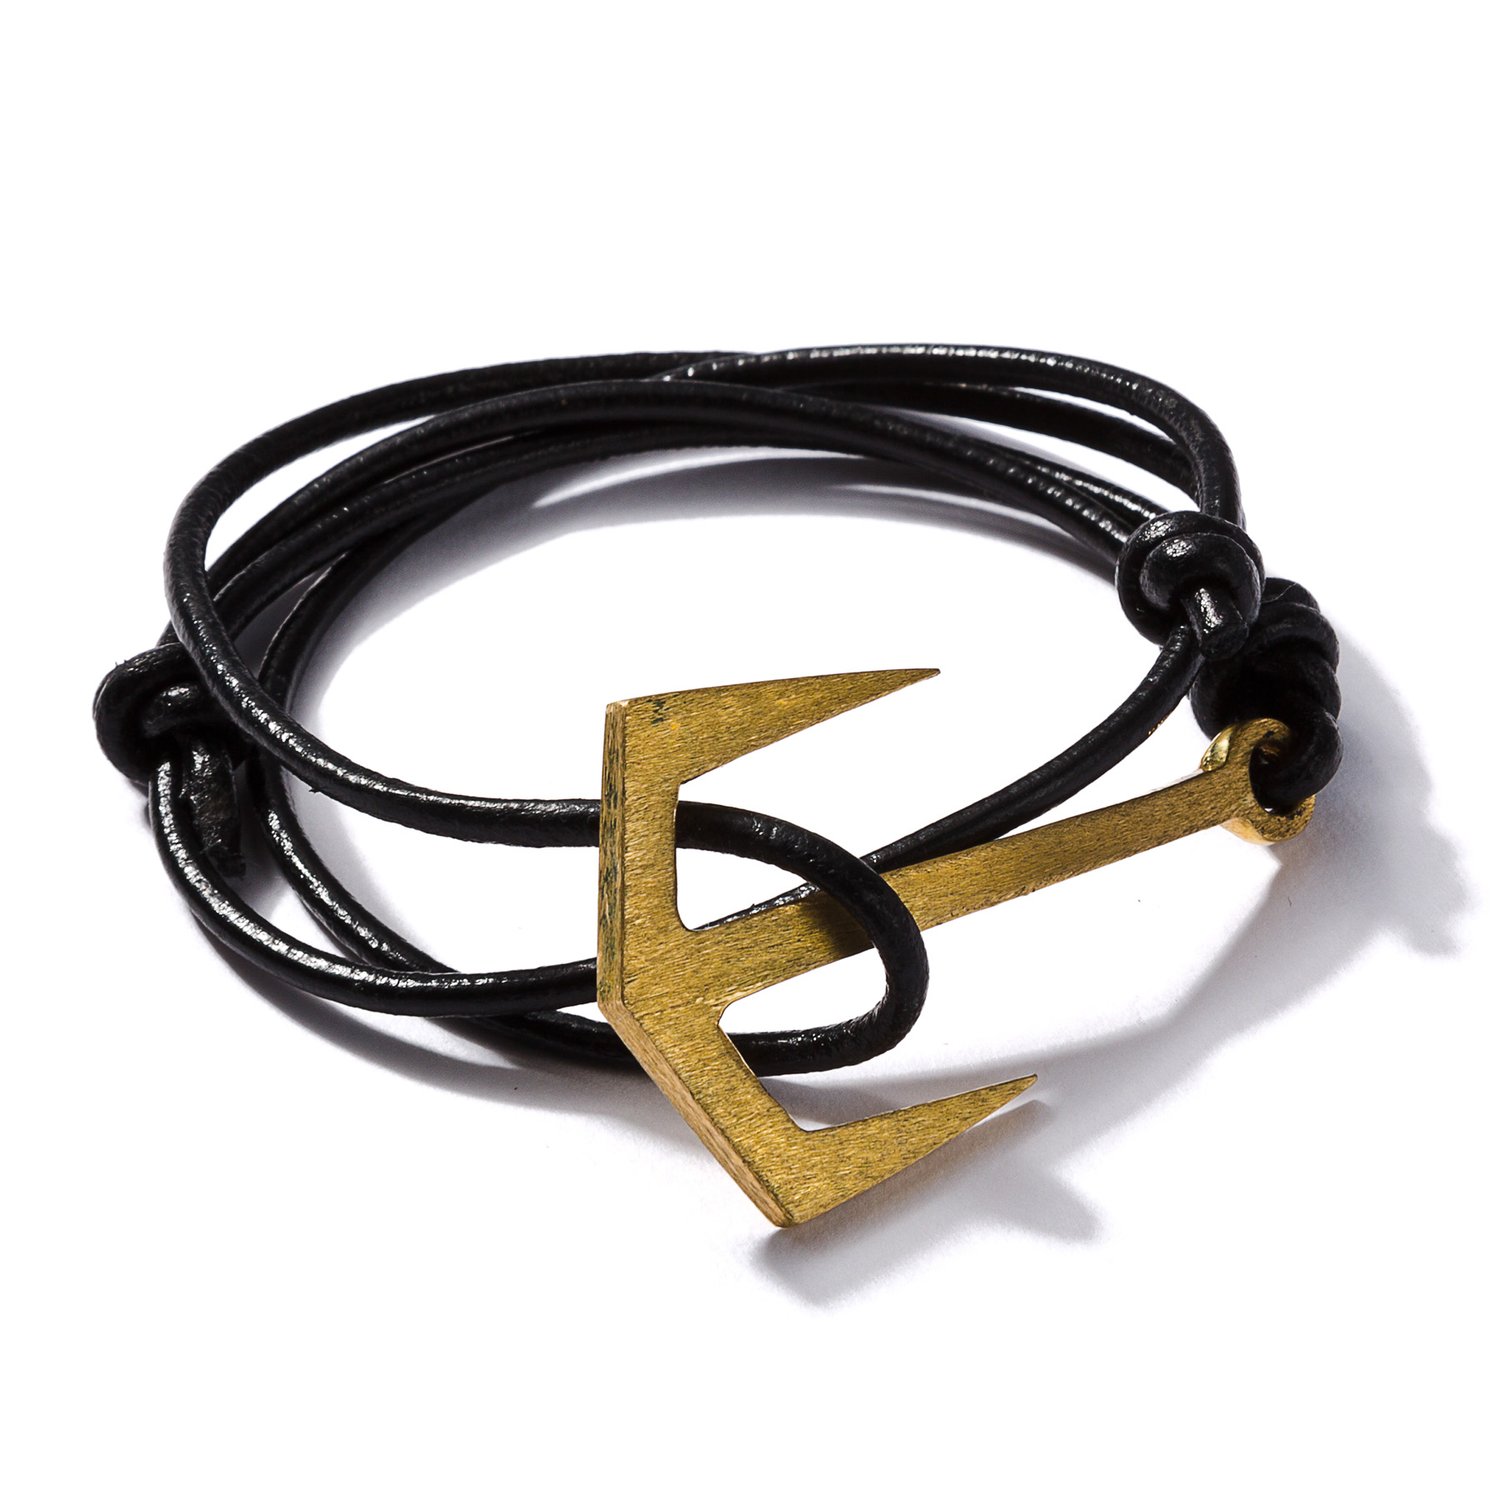 Stones & Bones NYC - Handcrafted Jewelry and Accessories Inspired by Nature